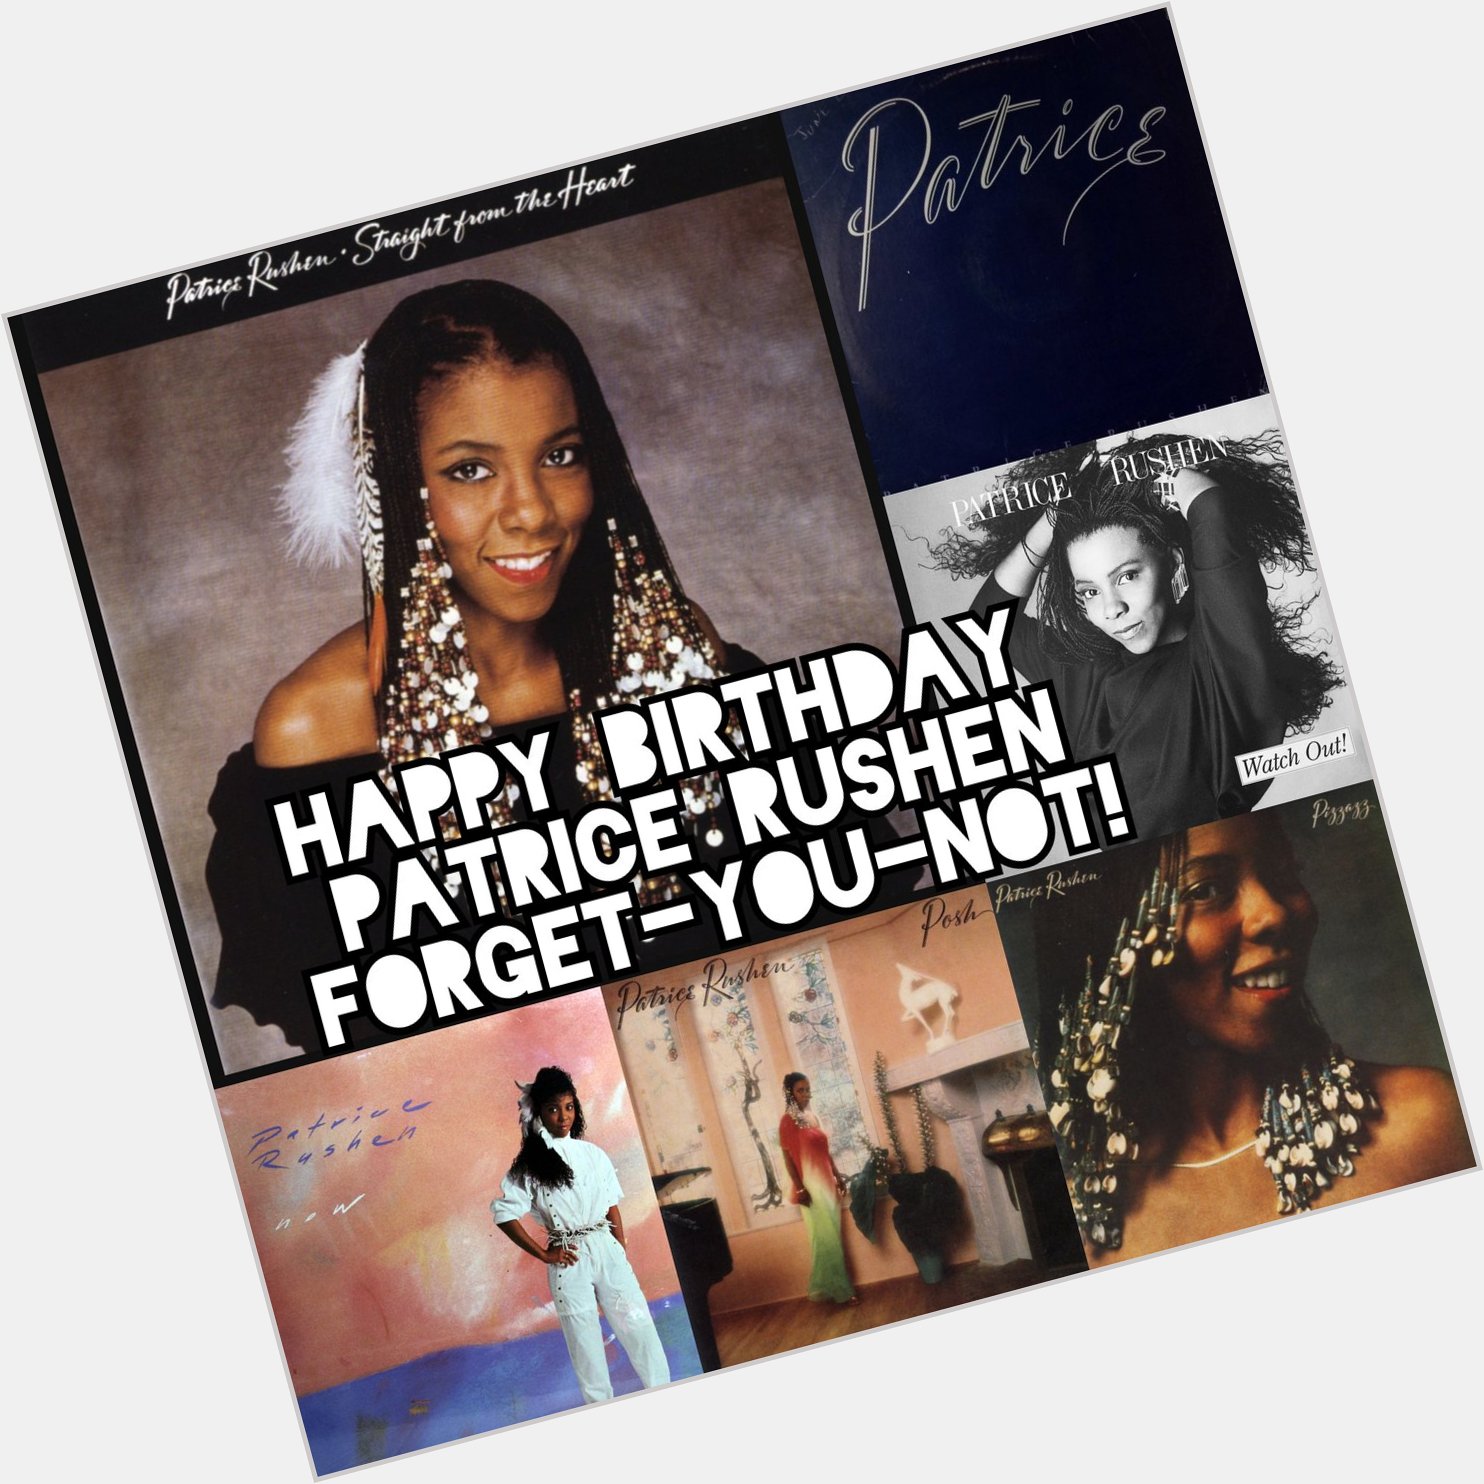 Happy Birthday, Patrice Rushen. Forget-You-Not!   